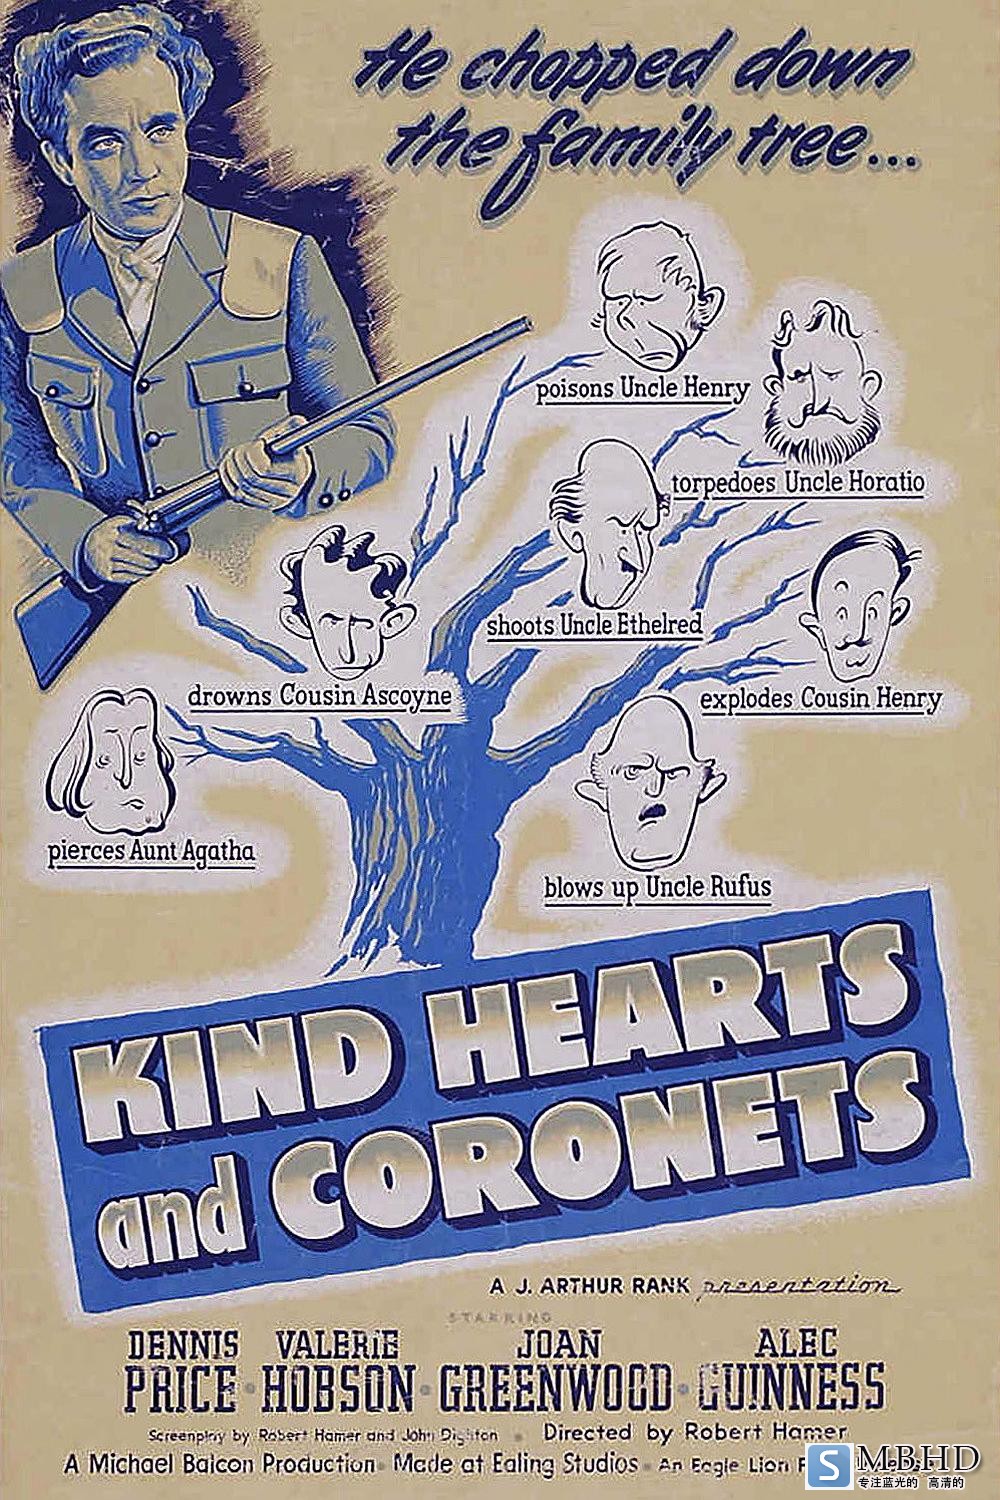 /ĳ Kind.Hearts.and.Coronets.1949.REMASTERED.1080p.BluRay.REMUX.AVC.LPC-1.png